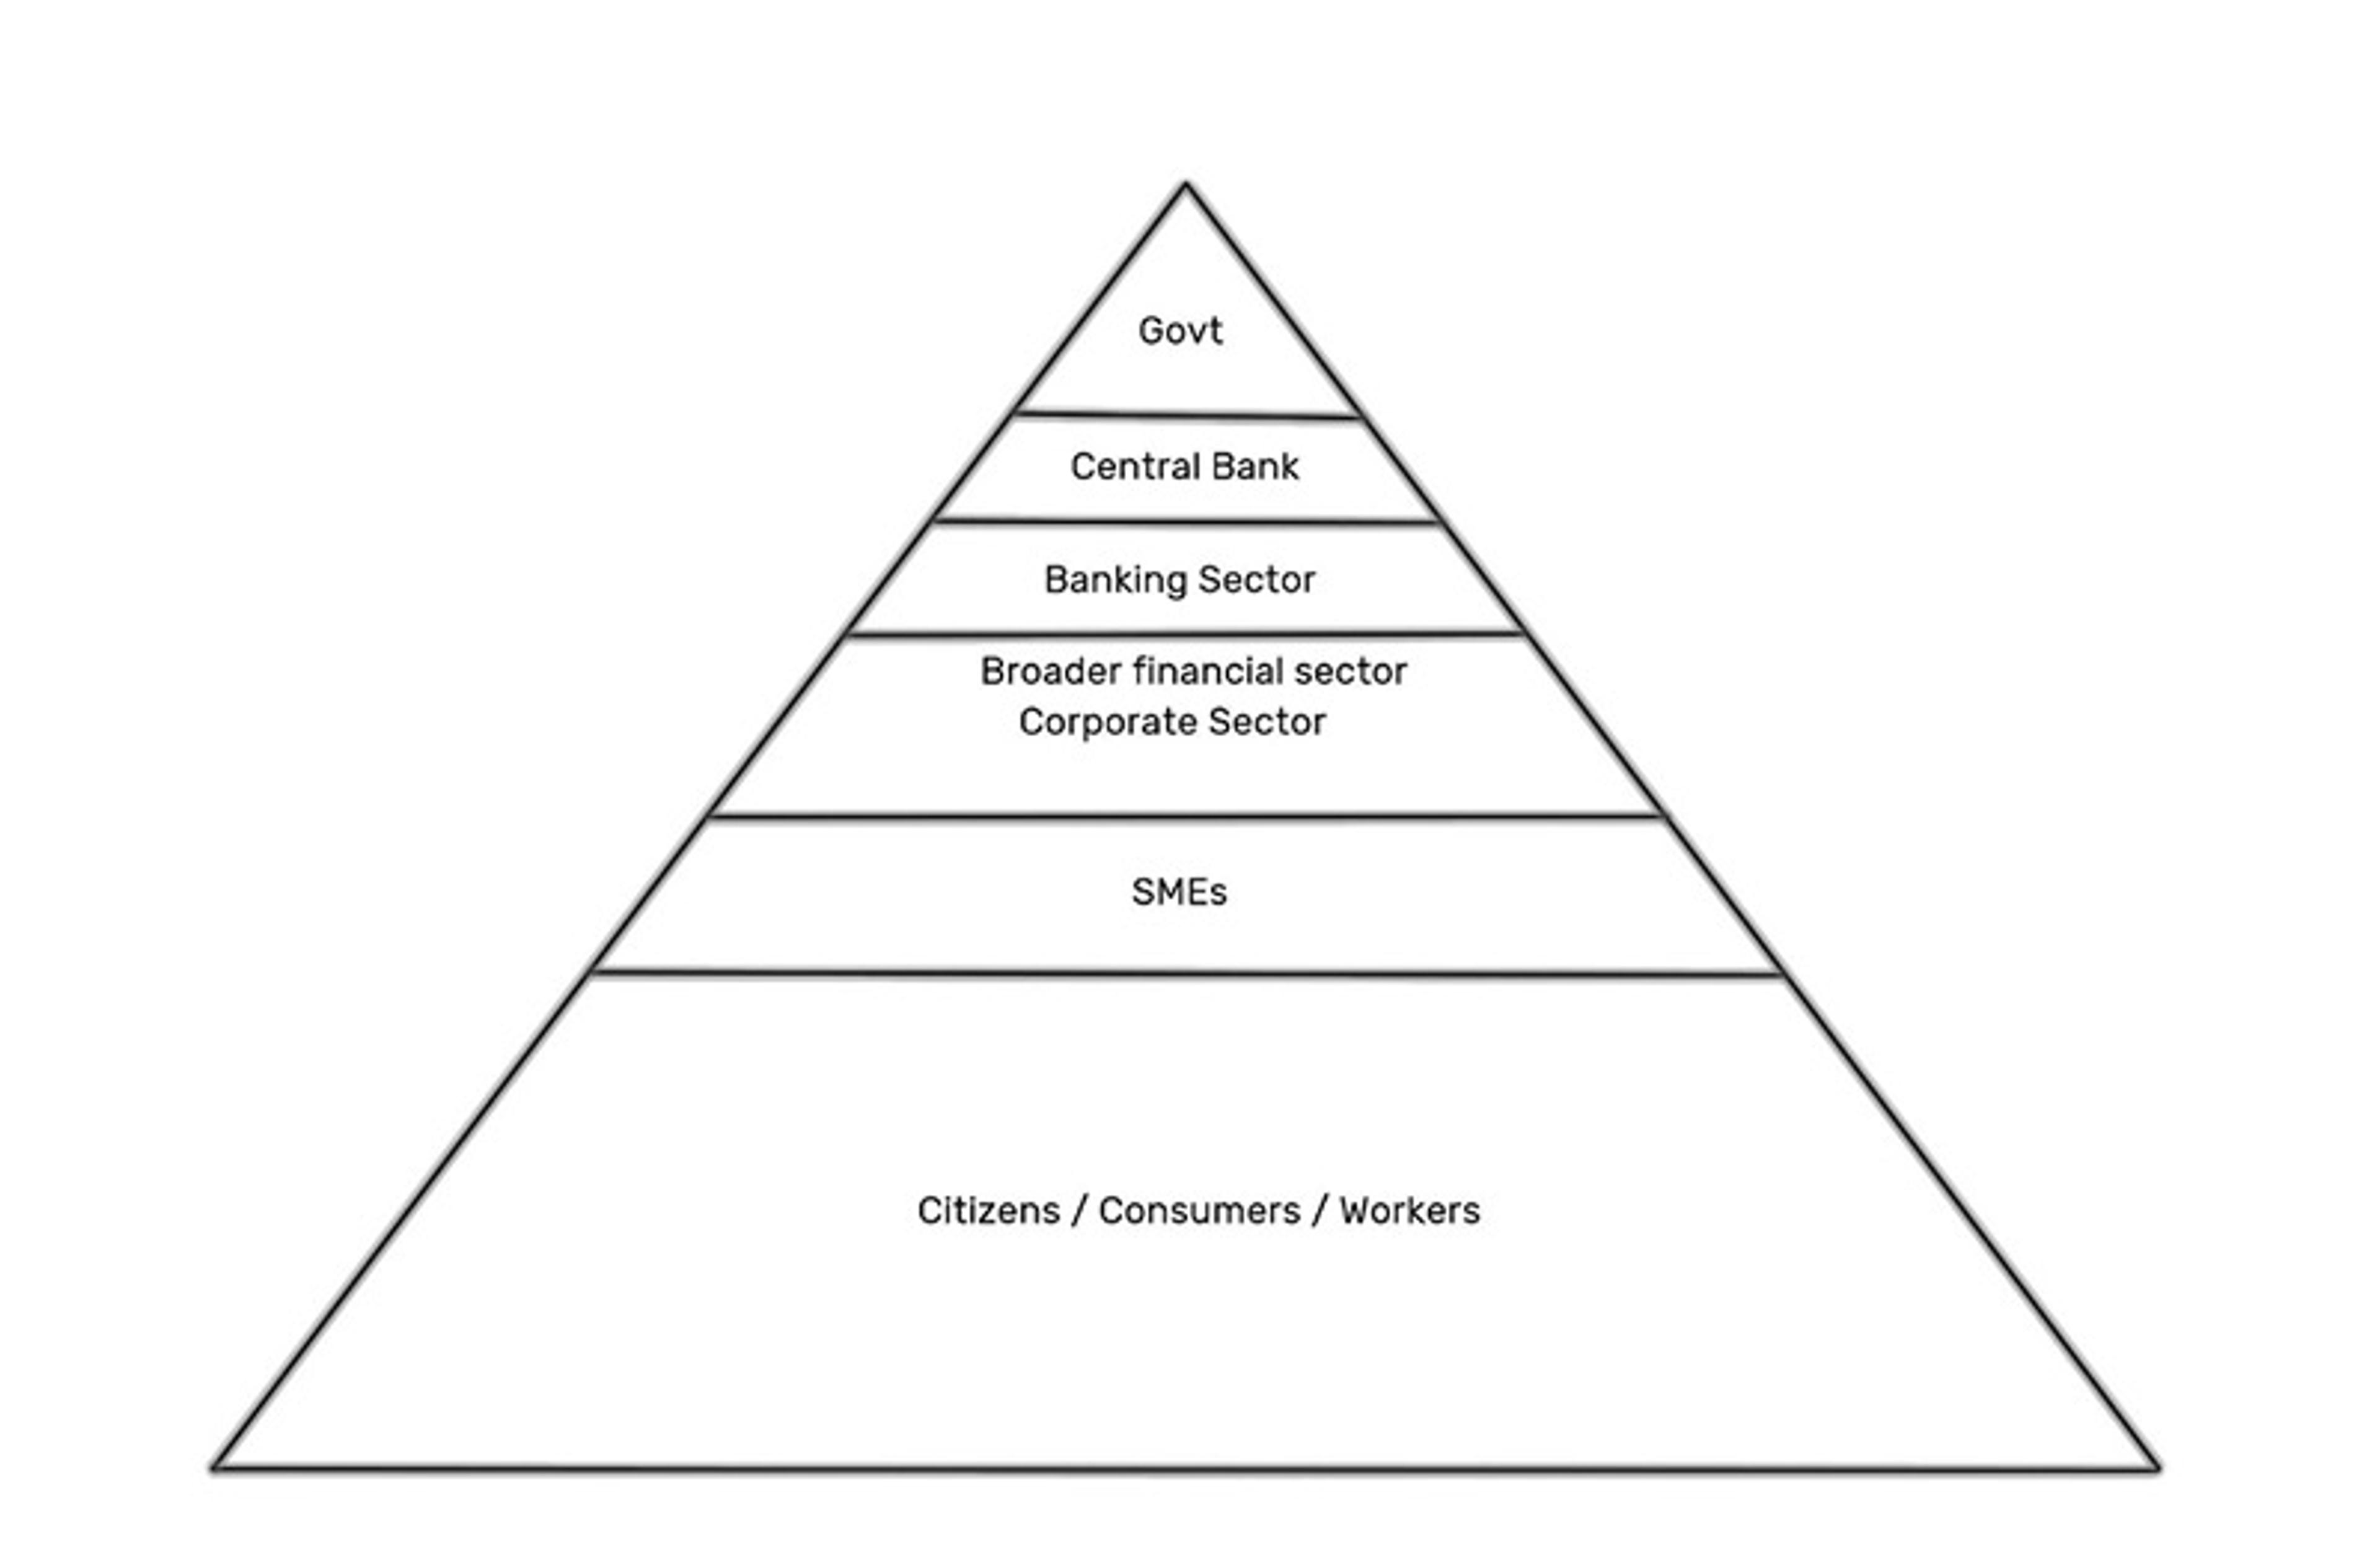 A hierarchical pyramid drawing depicting from the base upwards: citizens then SMEs then the financial sector then the banking sector then the central bank and with the government at the top